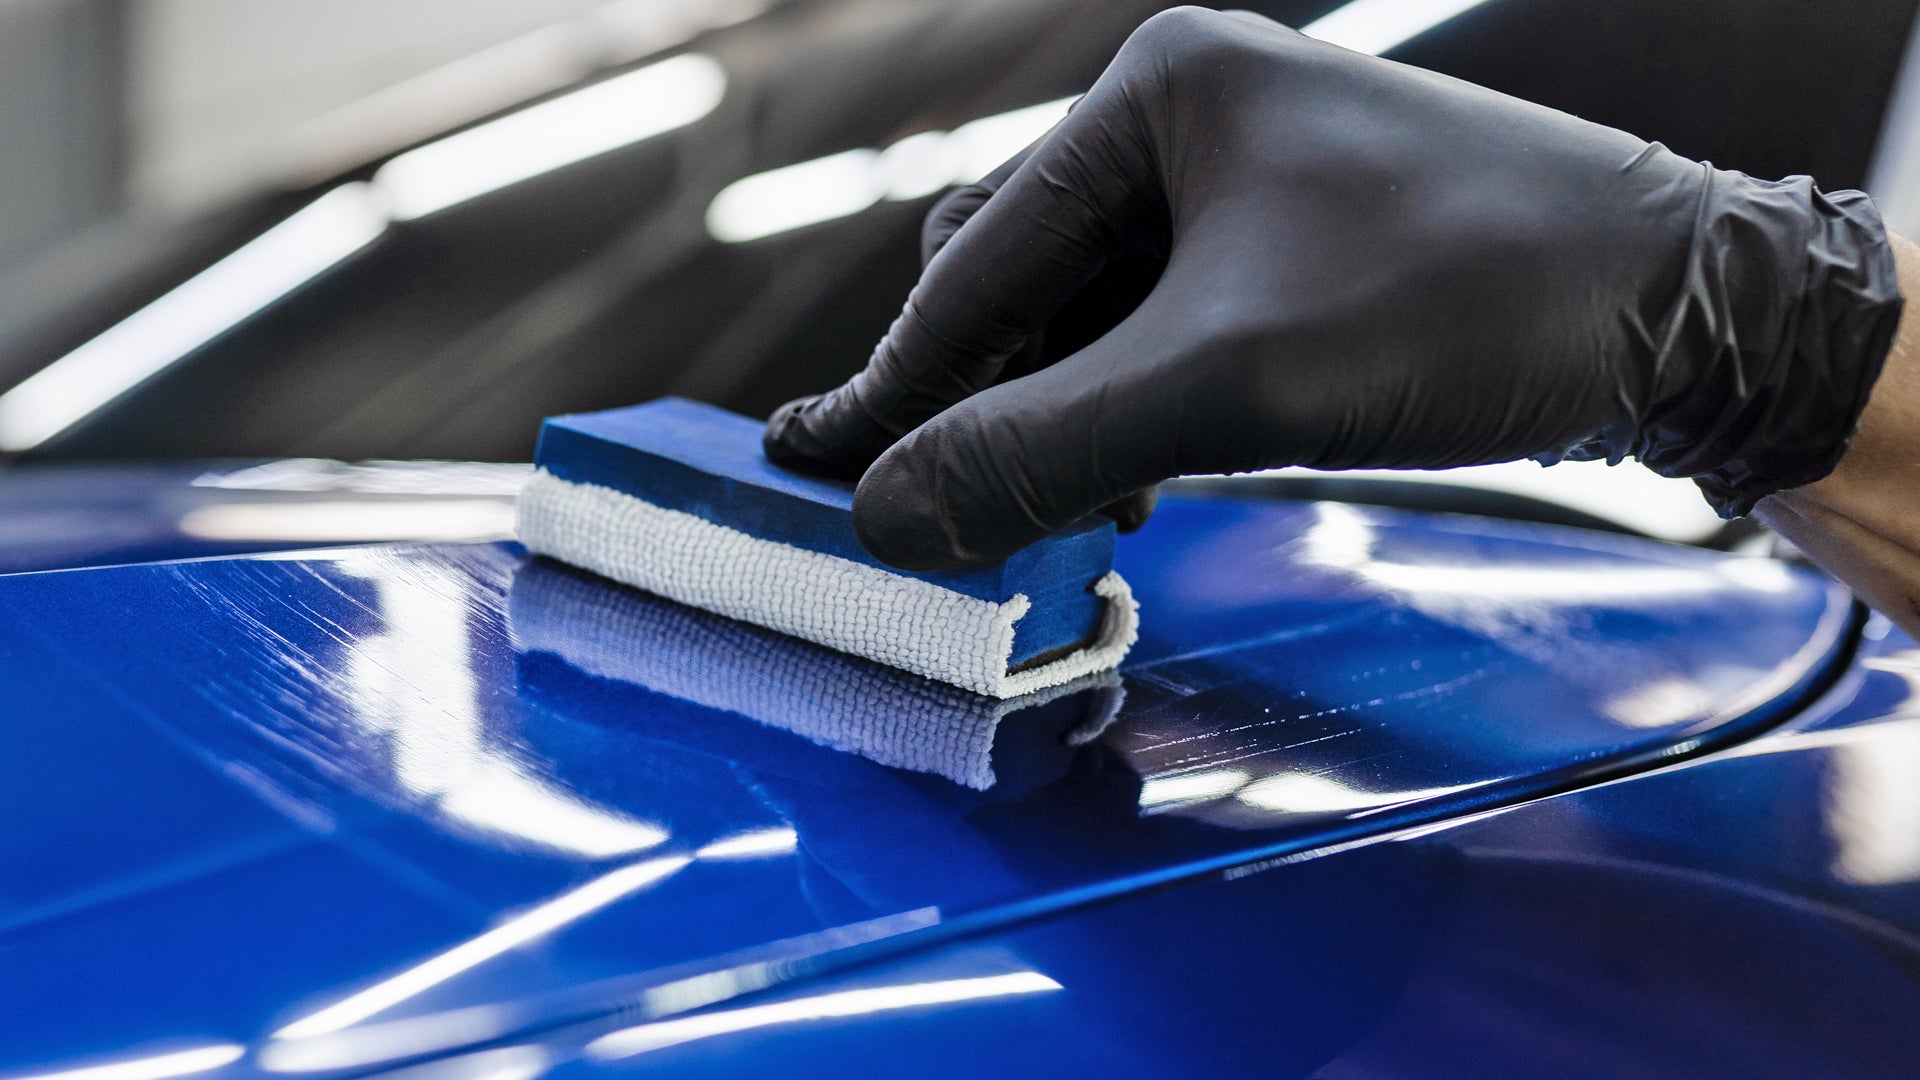 What is Ceramic Coating? What are its benefits?